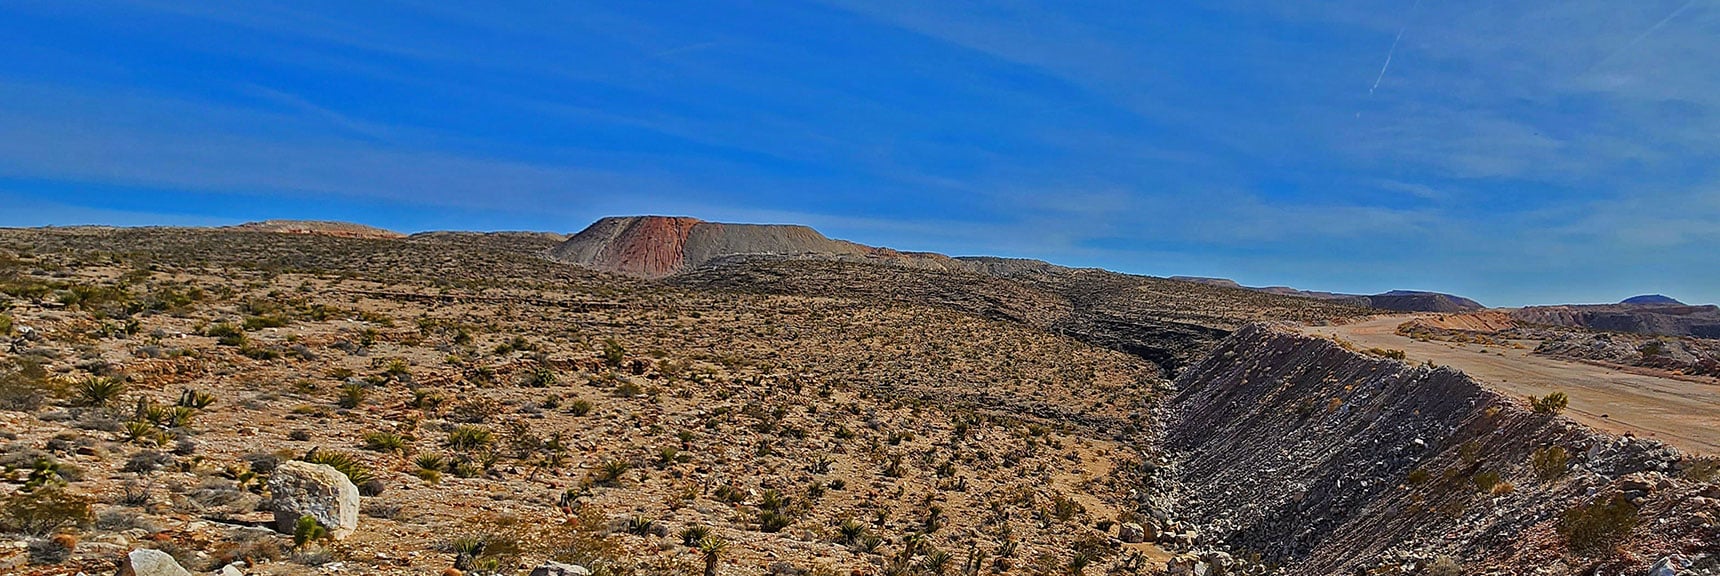 Maverick Windsock Hill is High Point to Left of Mining Mound Ahead | Western Outer Circuit | Blue Diamond Hill | Red Rock Canyon, Nevada